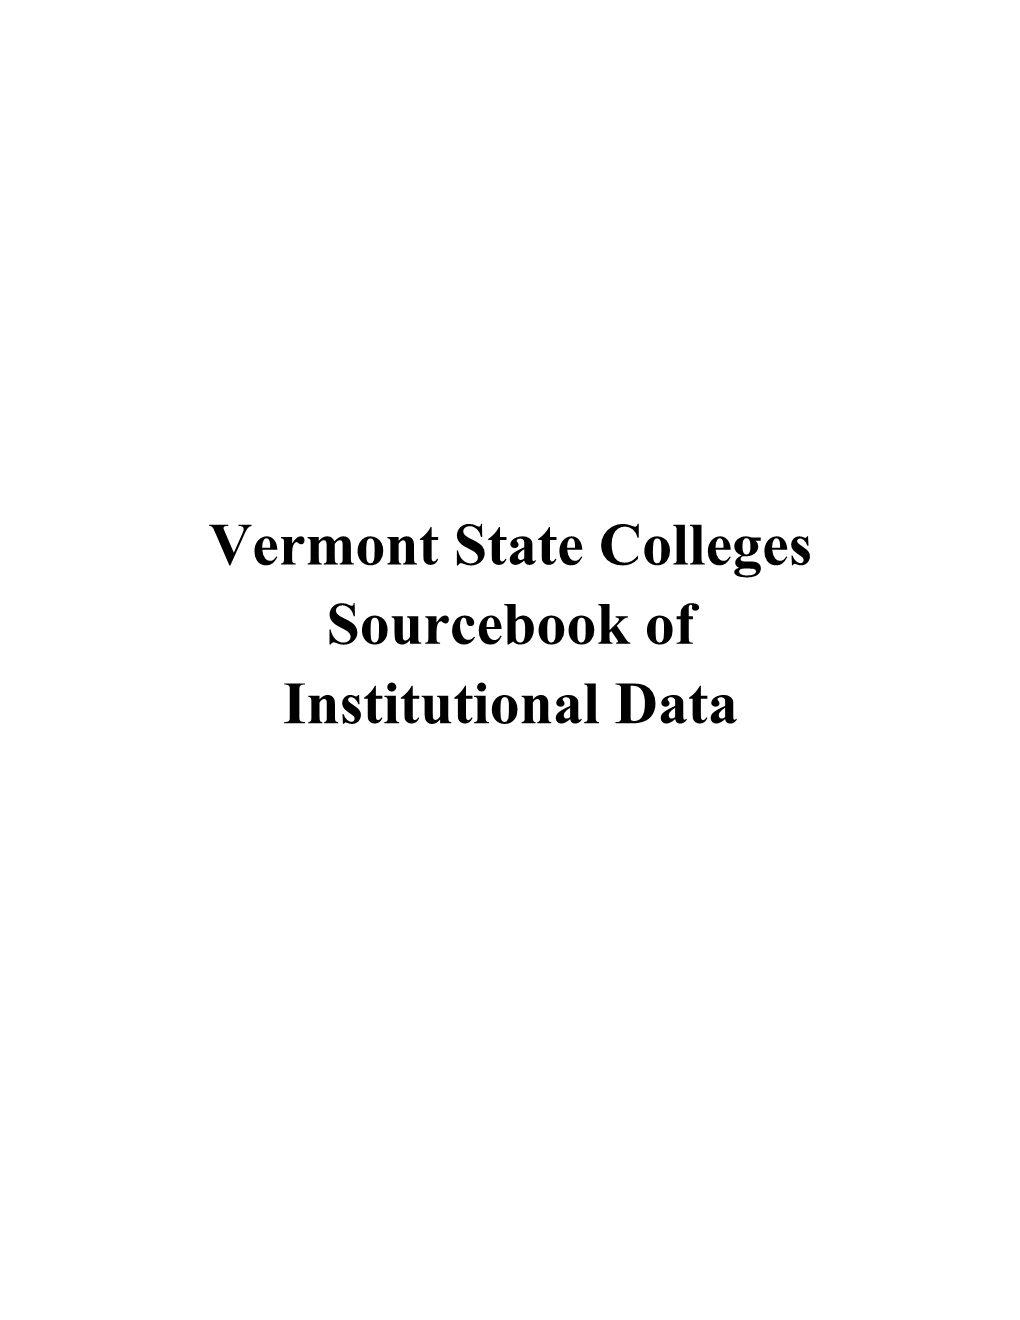 Vermont State Colleges Sourcebook of Institutional Data